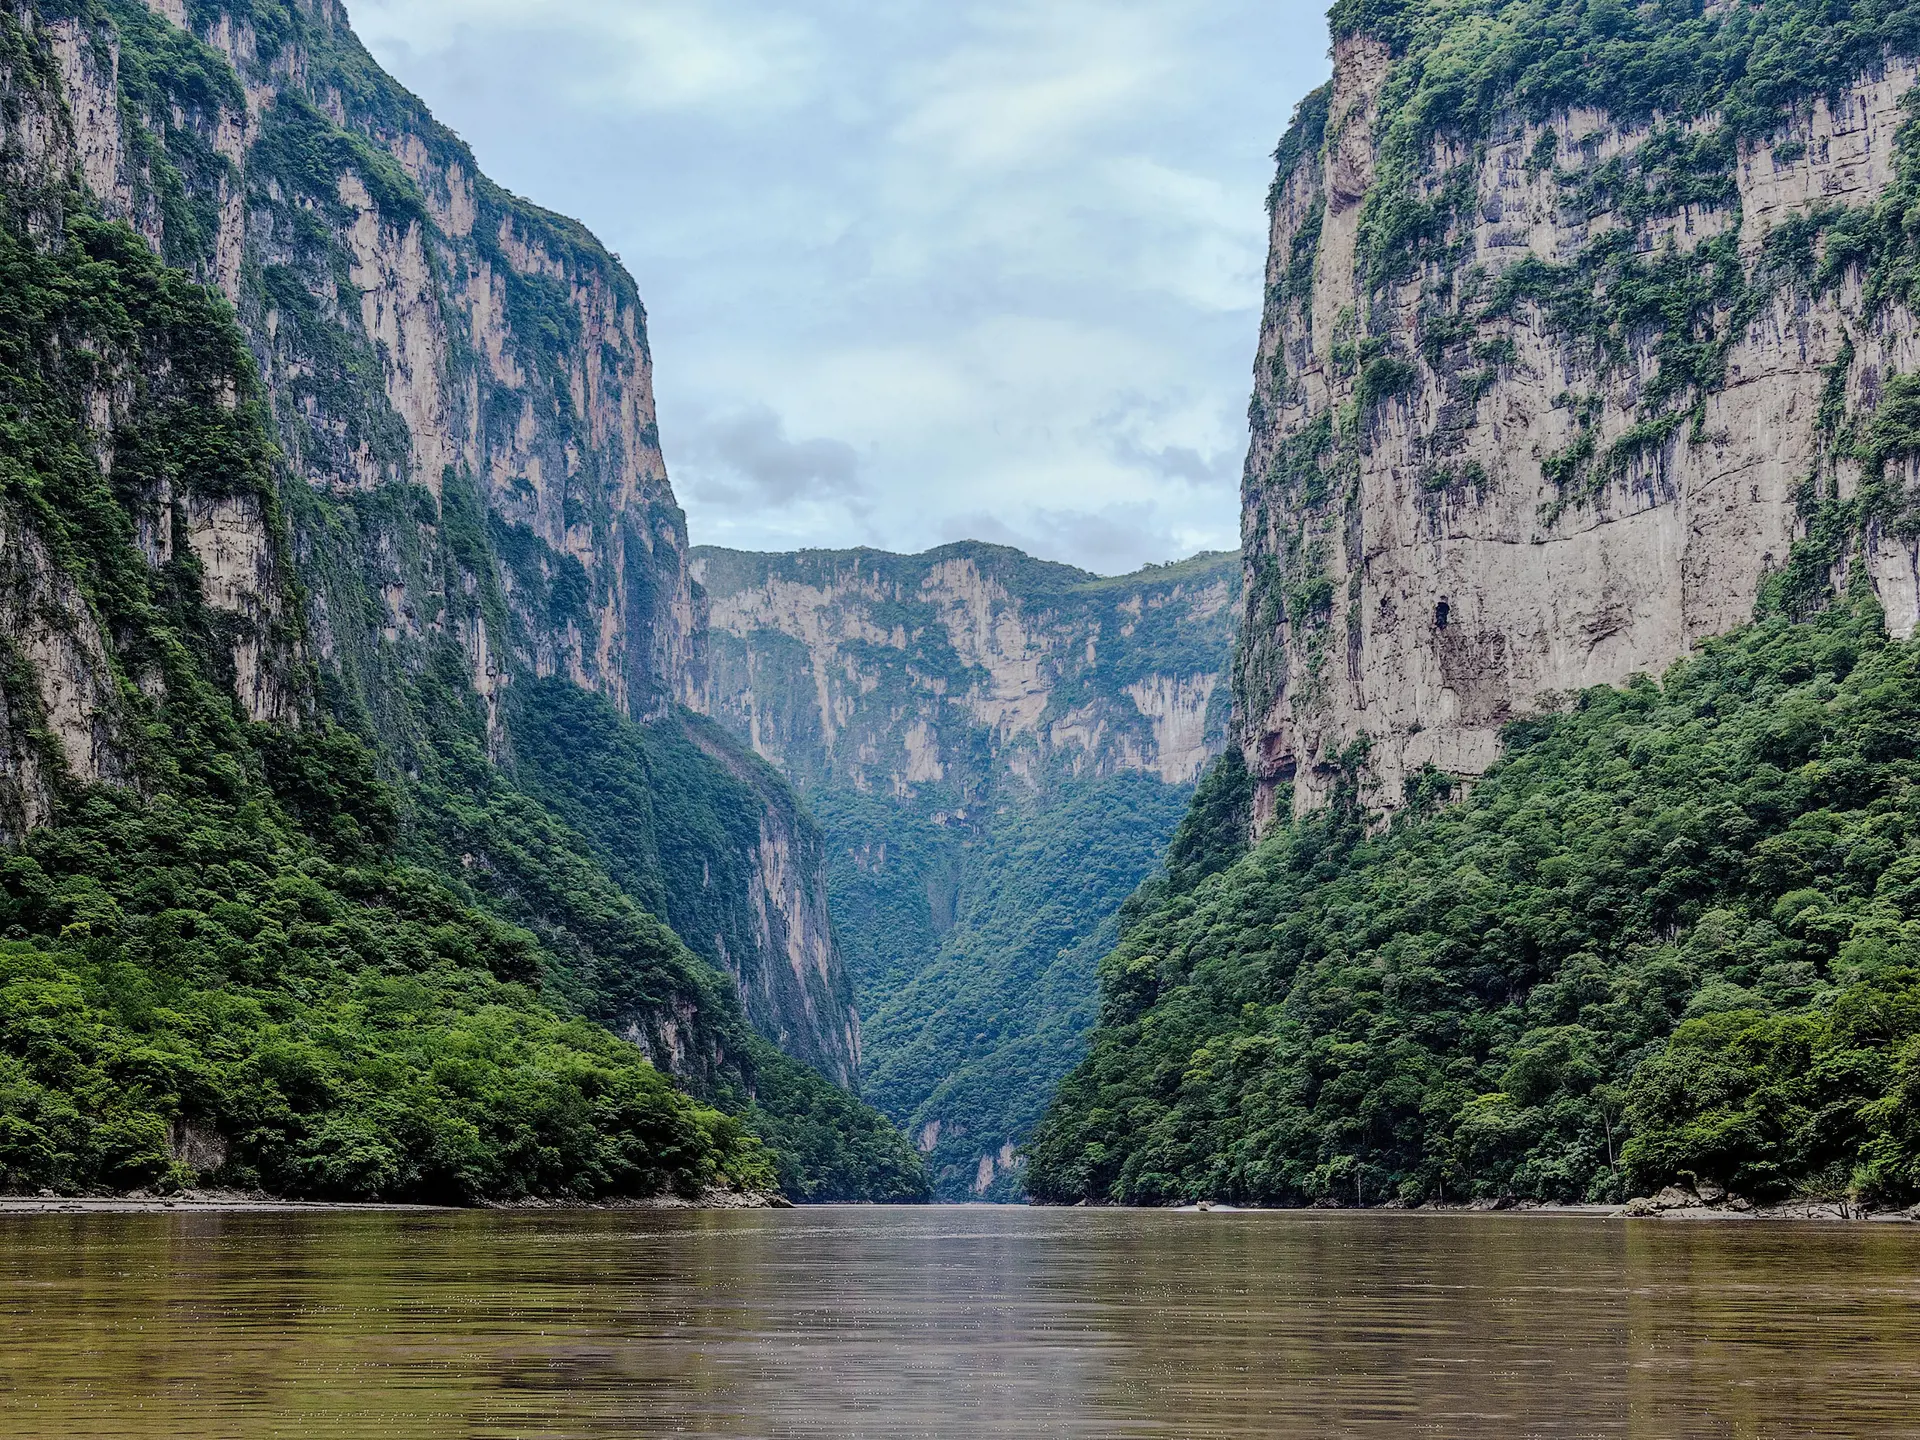 shutterstock_523122271 Sumidero is the deepest canyon in Mexico on the Rio Grijalva - Latin America.jpg